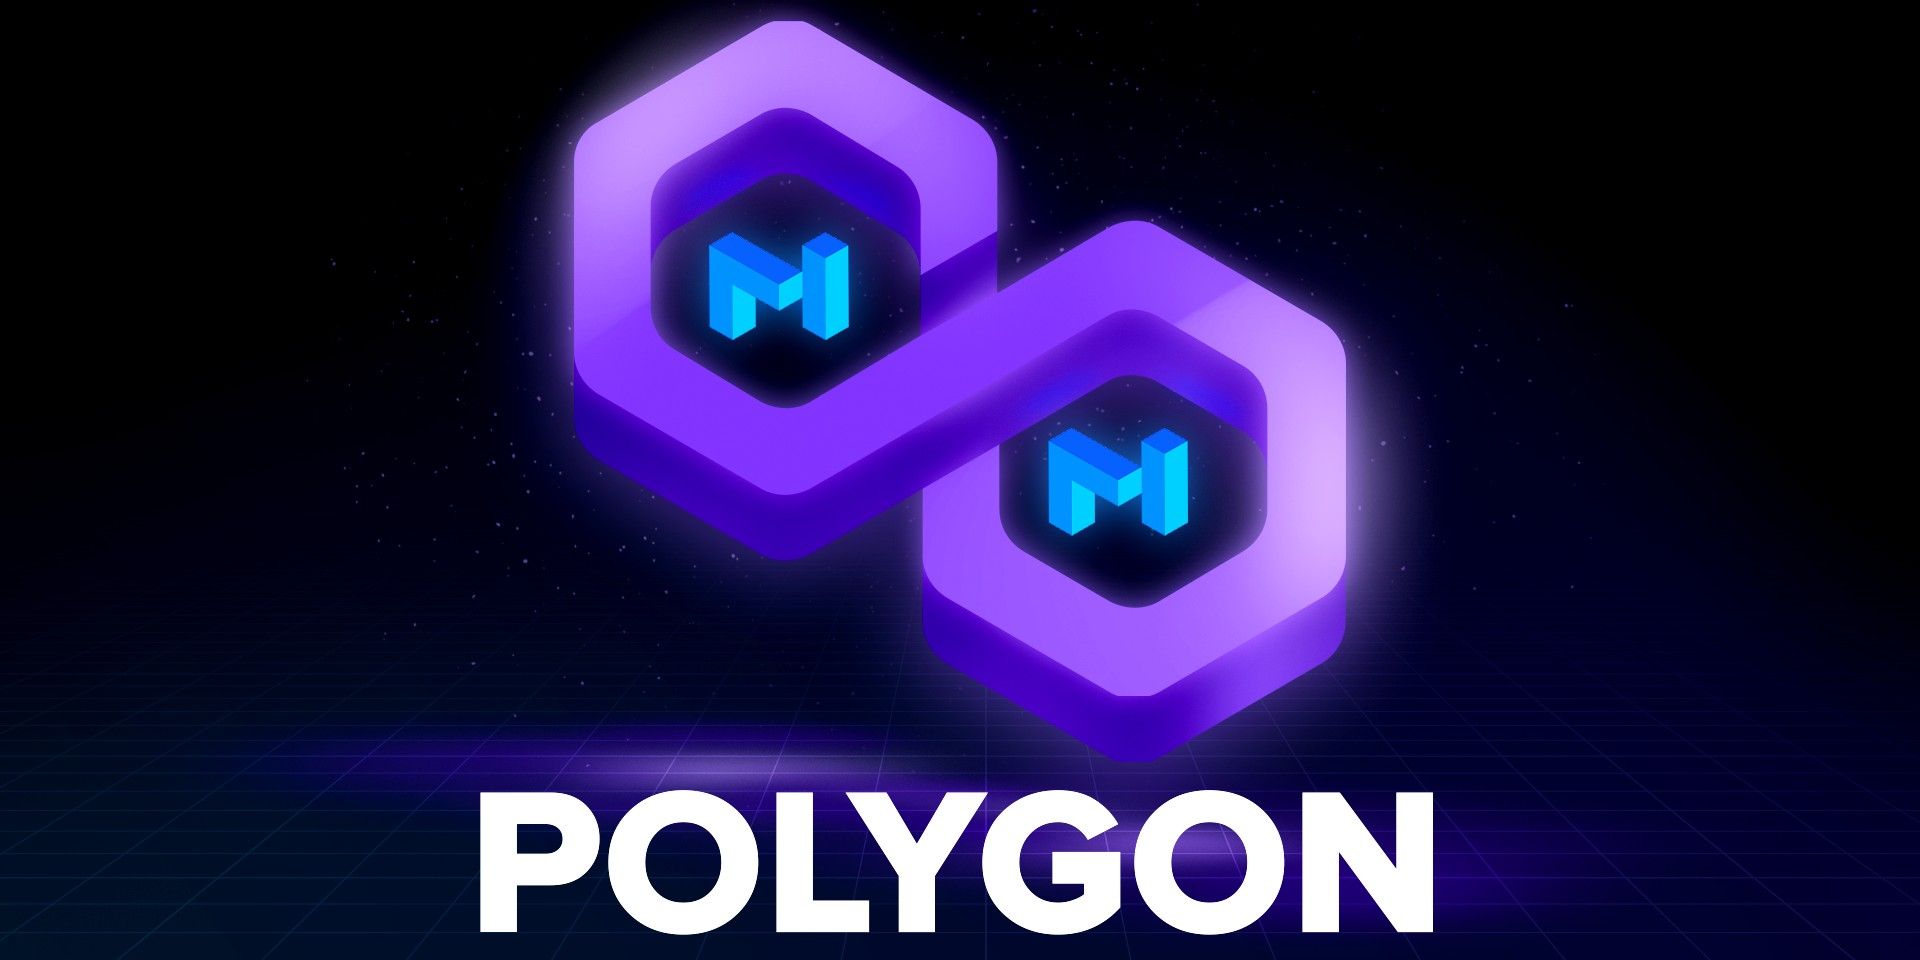 Polygon logo with MATIC logos on digital space background, 